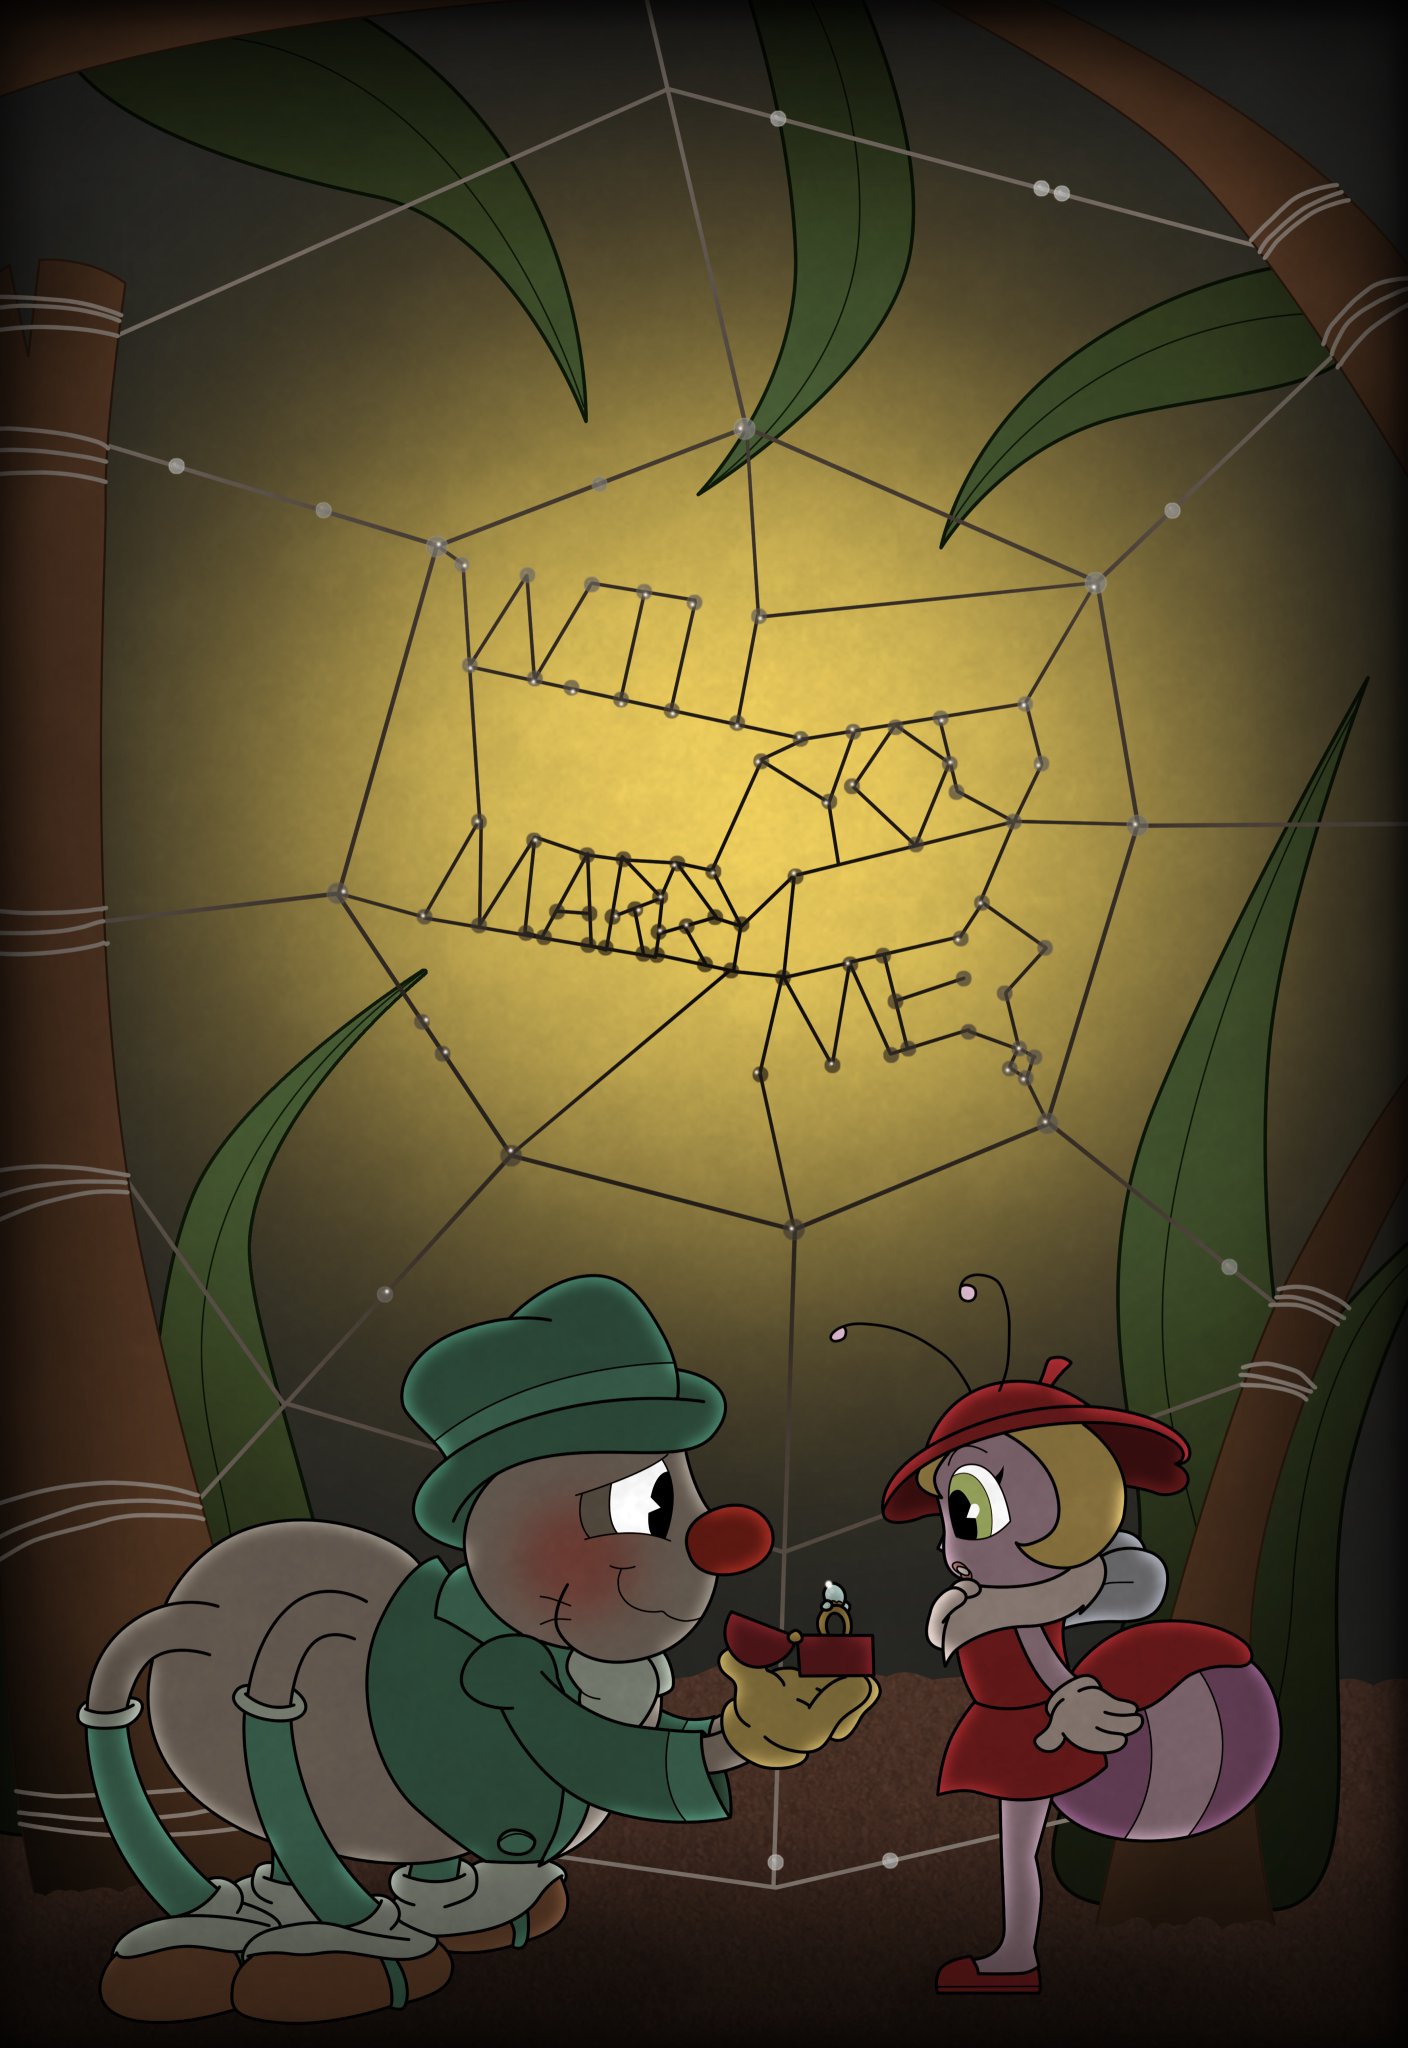 Miss D on X: So according to the wiki, the spider and light-bug are a  married couple. So he probably proposed to her like this. #cuphead  #CupheadDLC t.coLccaDX8qvJ  X